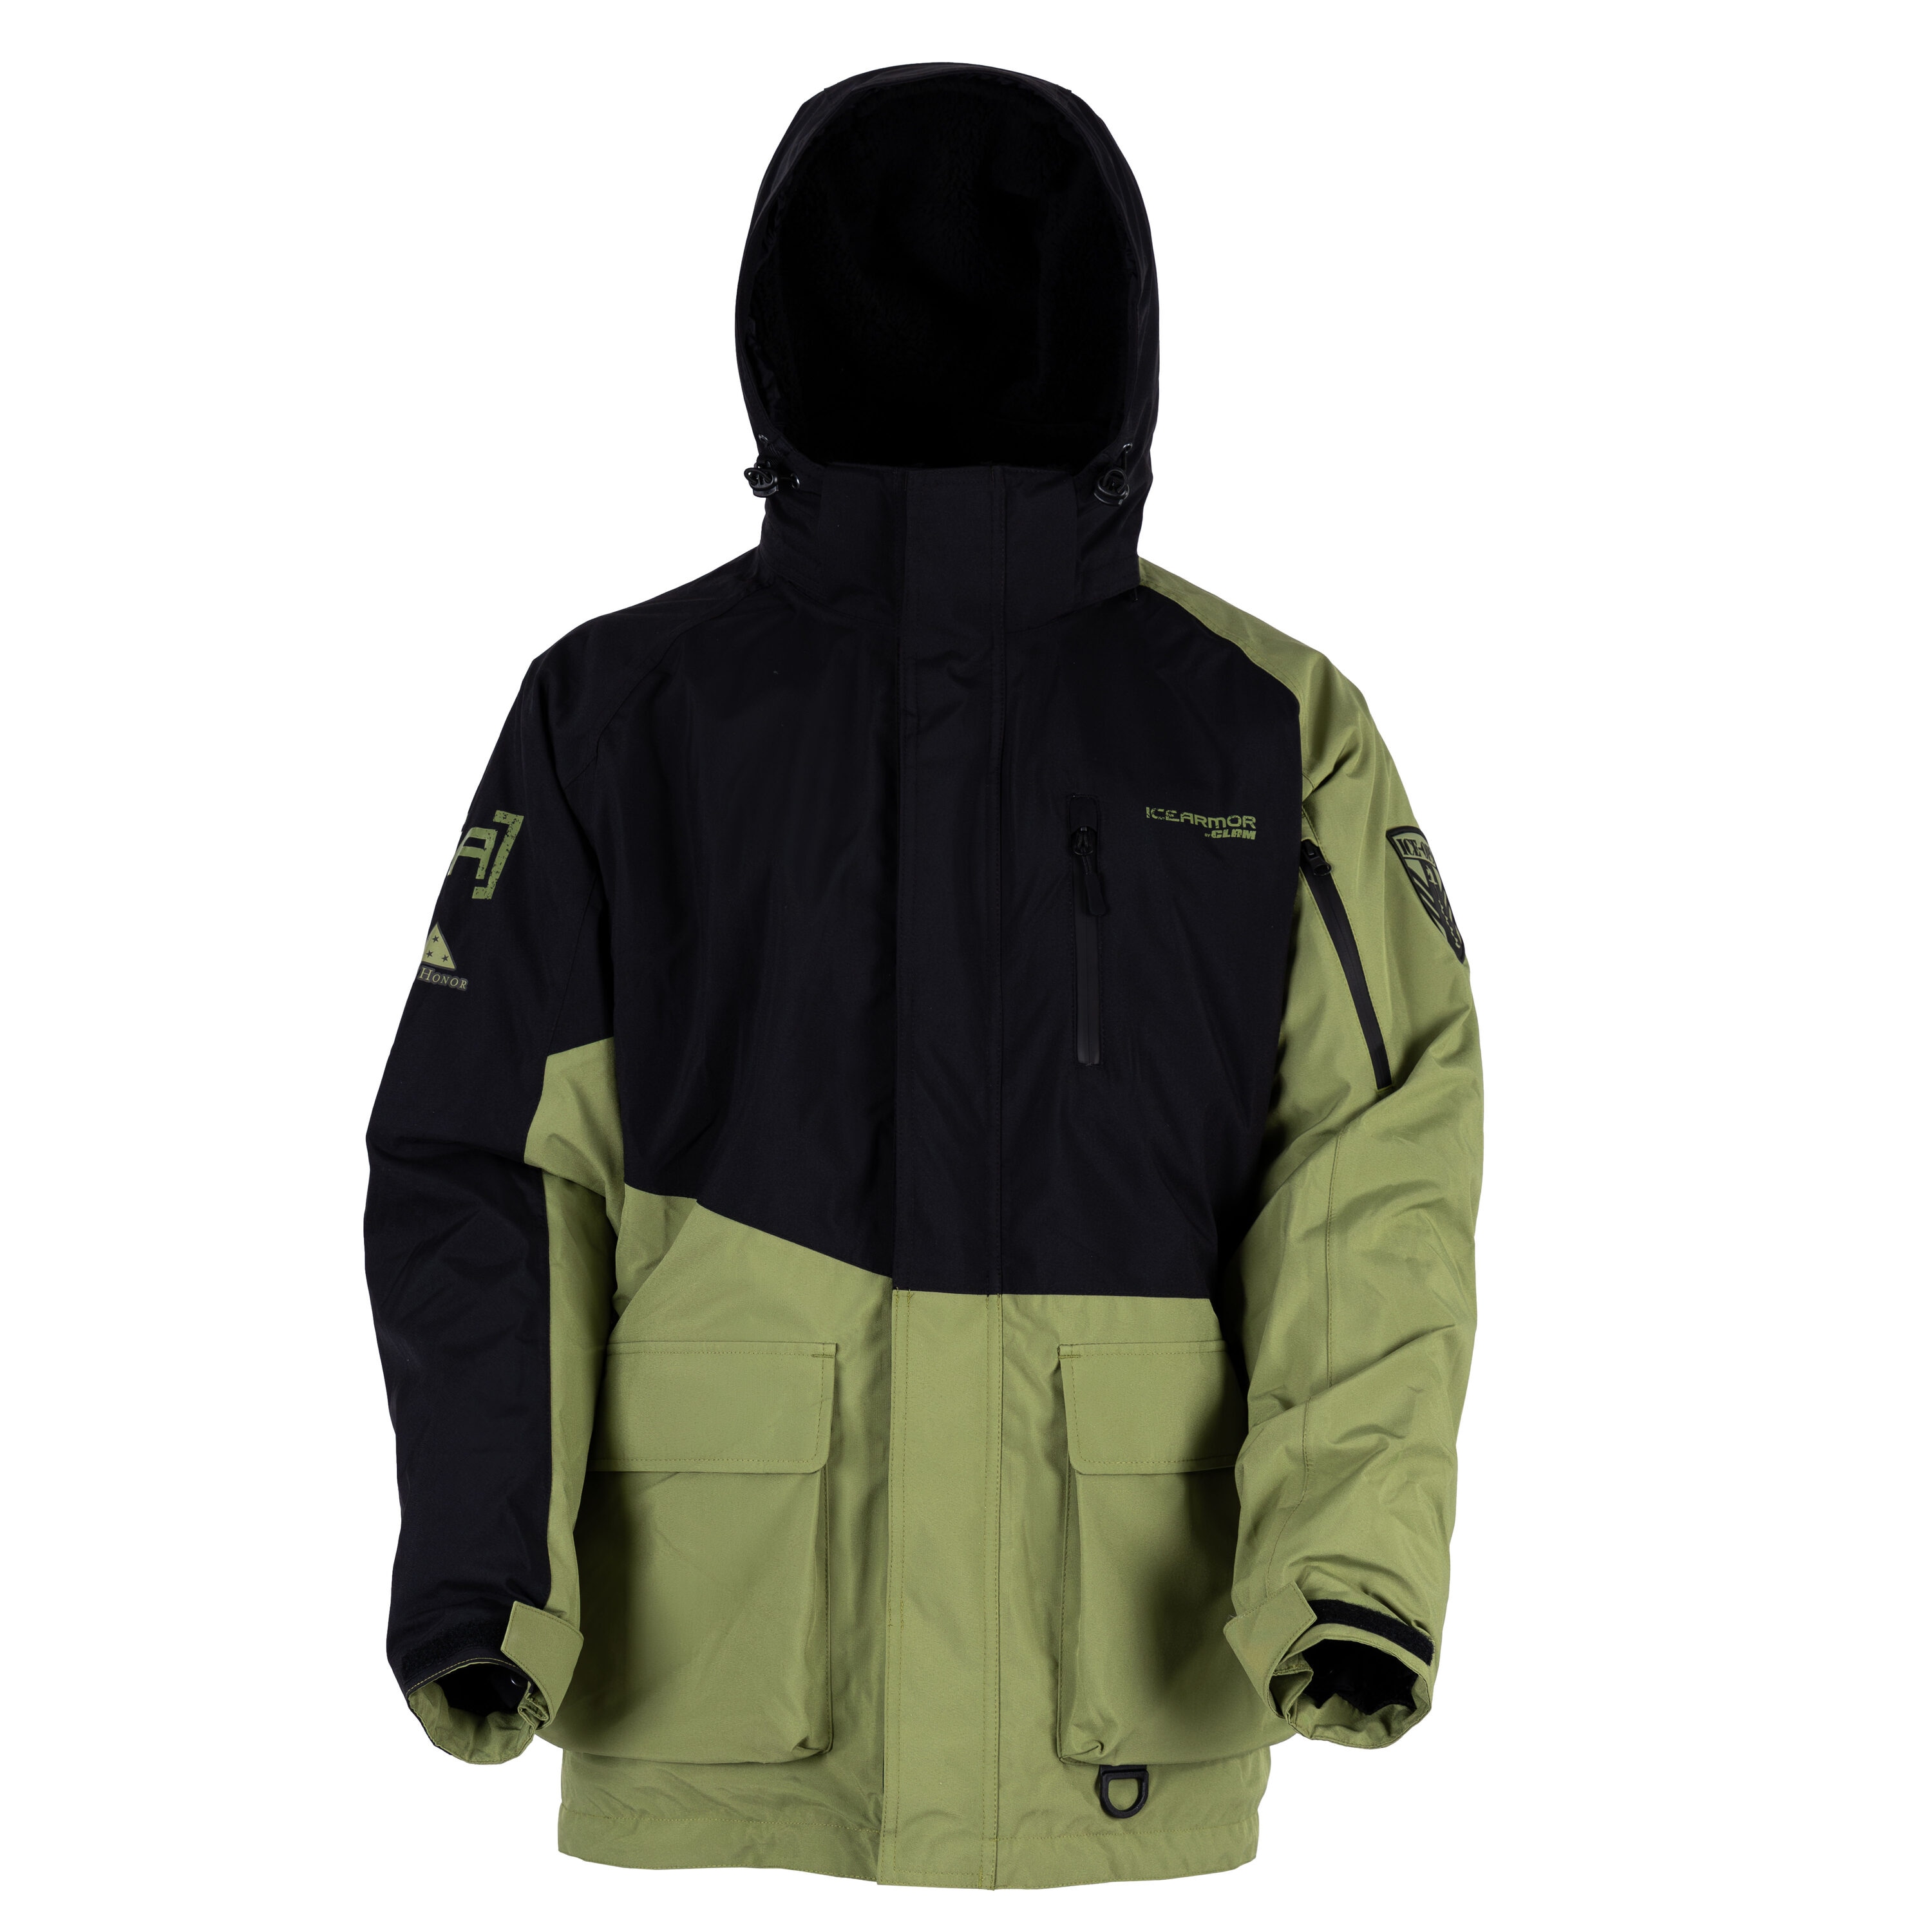 Clam Ice Armor Delta Float Parka, Small, Drab Green and Black, Folds of Honor